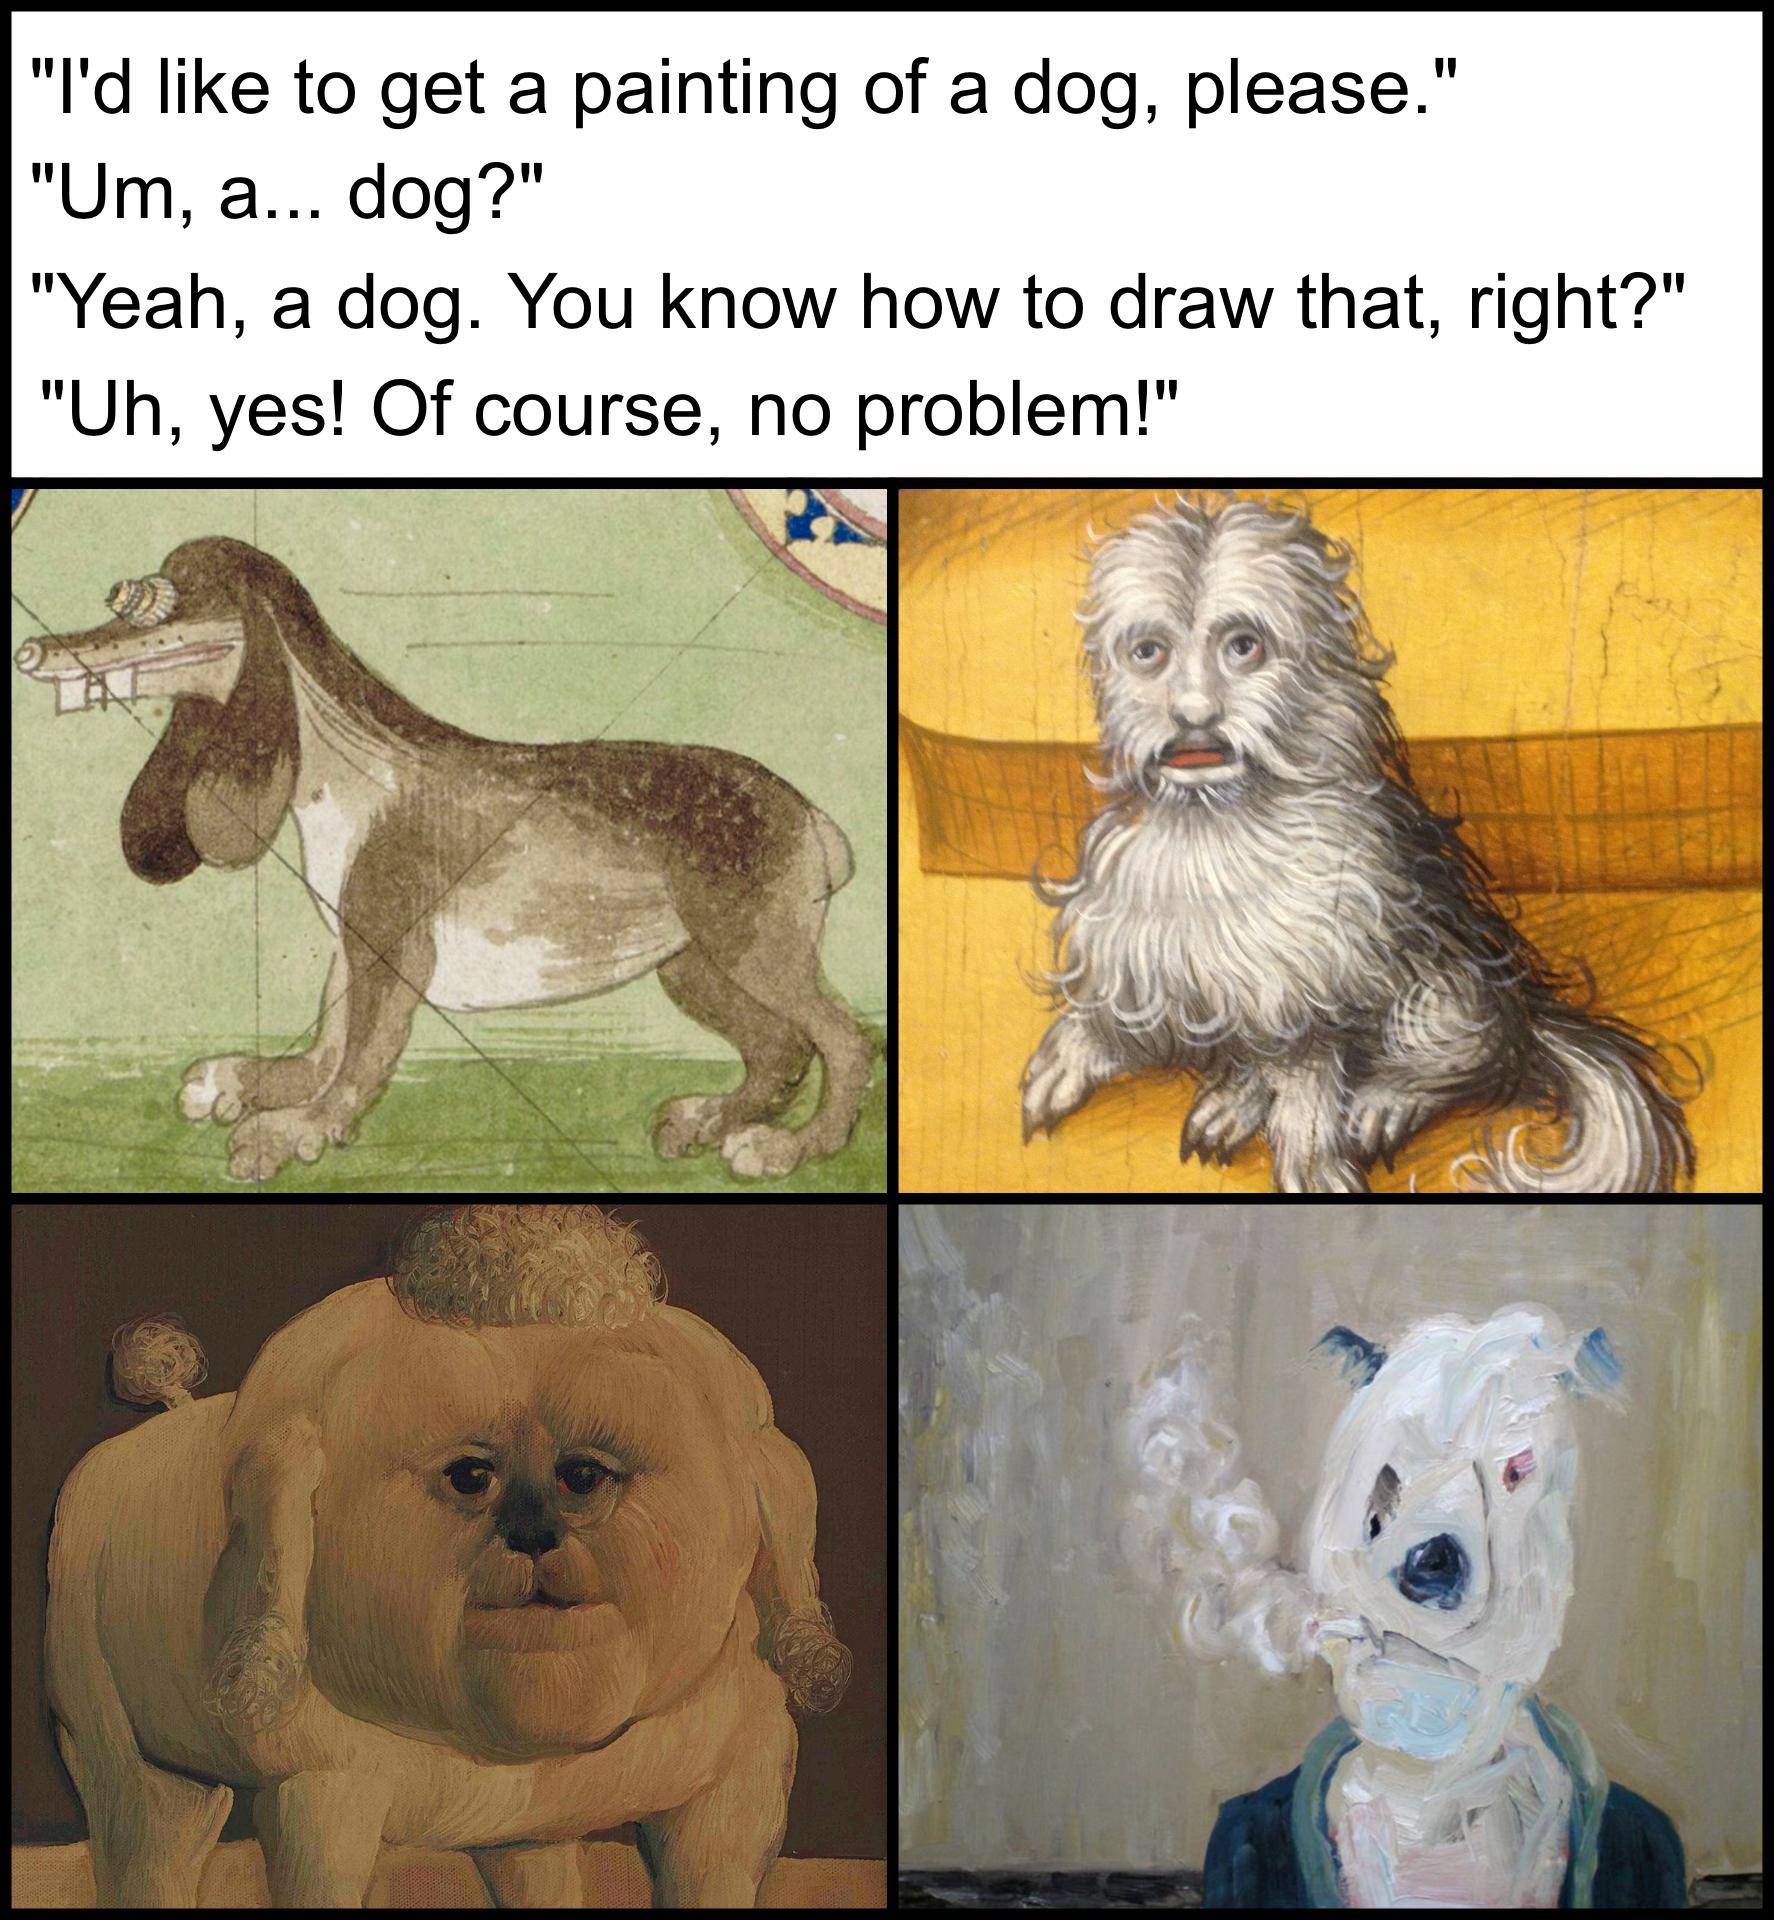 funny memes  - Dog - 1 "I'd to get a painting of a dog, please." "Um, a... dog?" "Yeah, a dog. You know how to draw that, right?" "Uh, yes! Of course, no problem!"